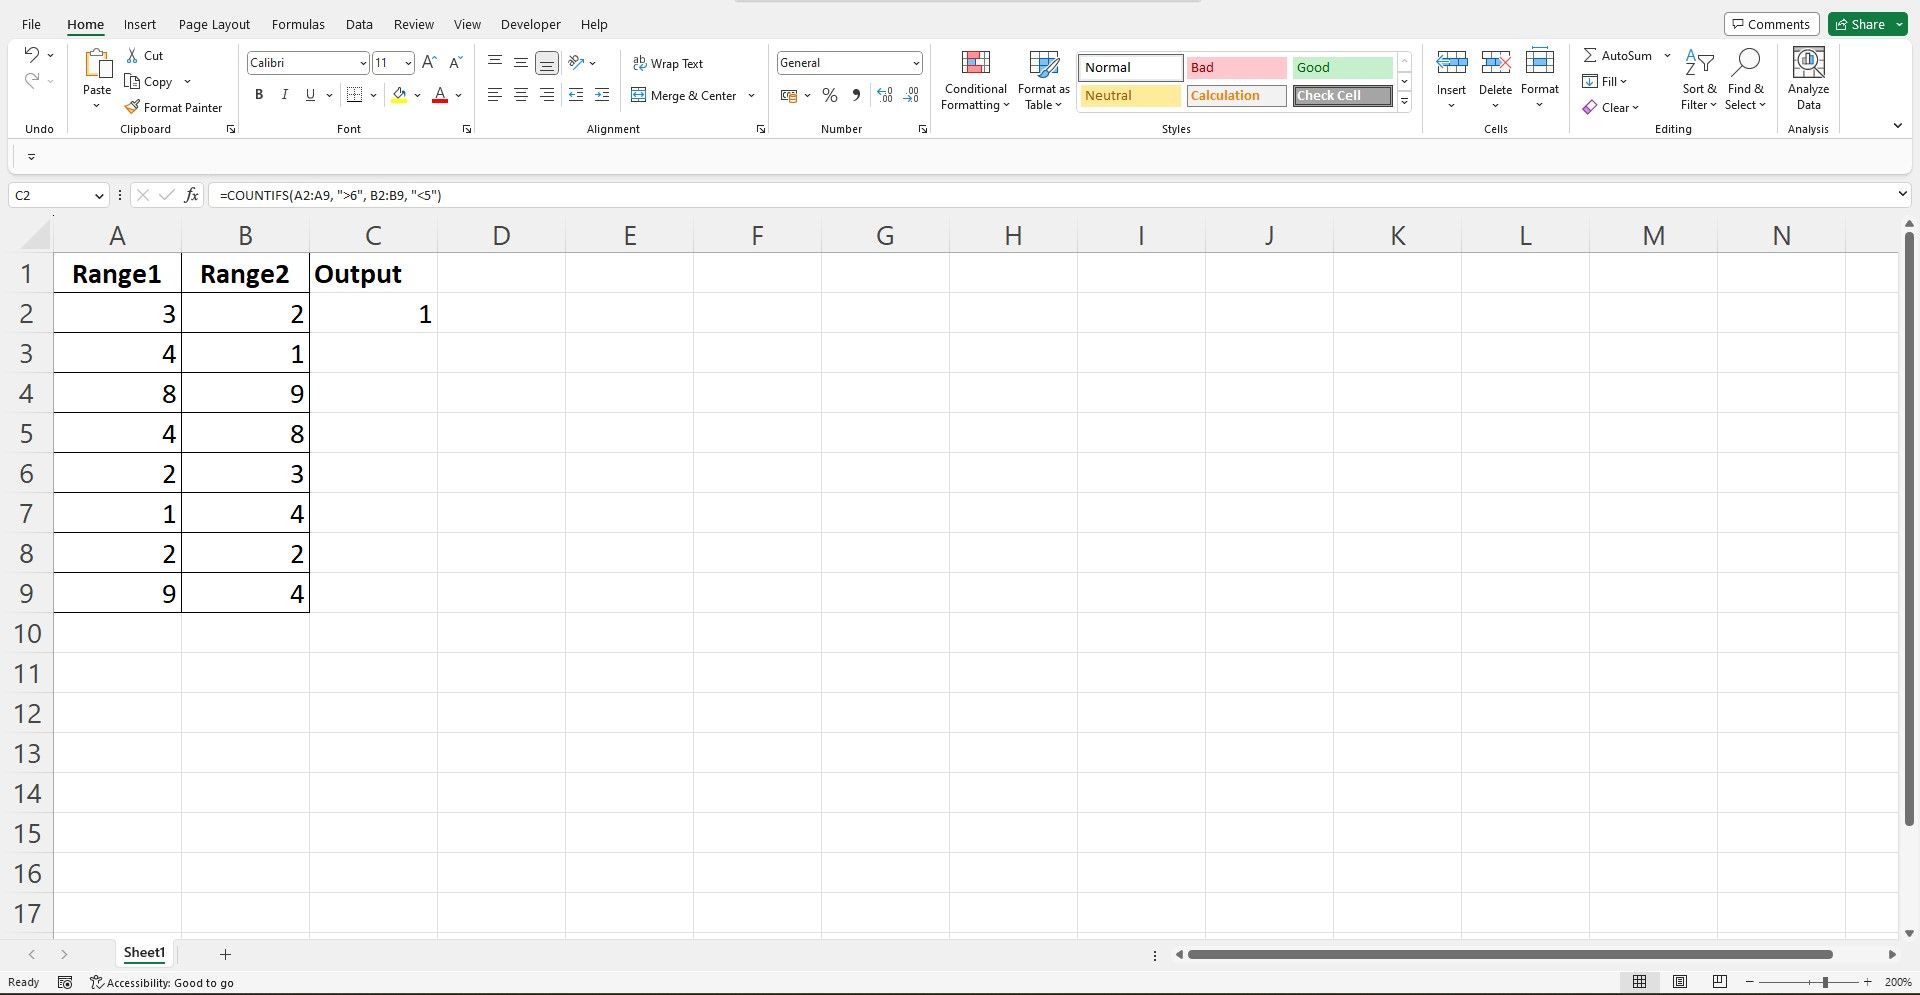 Two data columns in an excel sheet